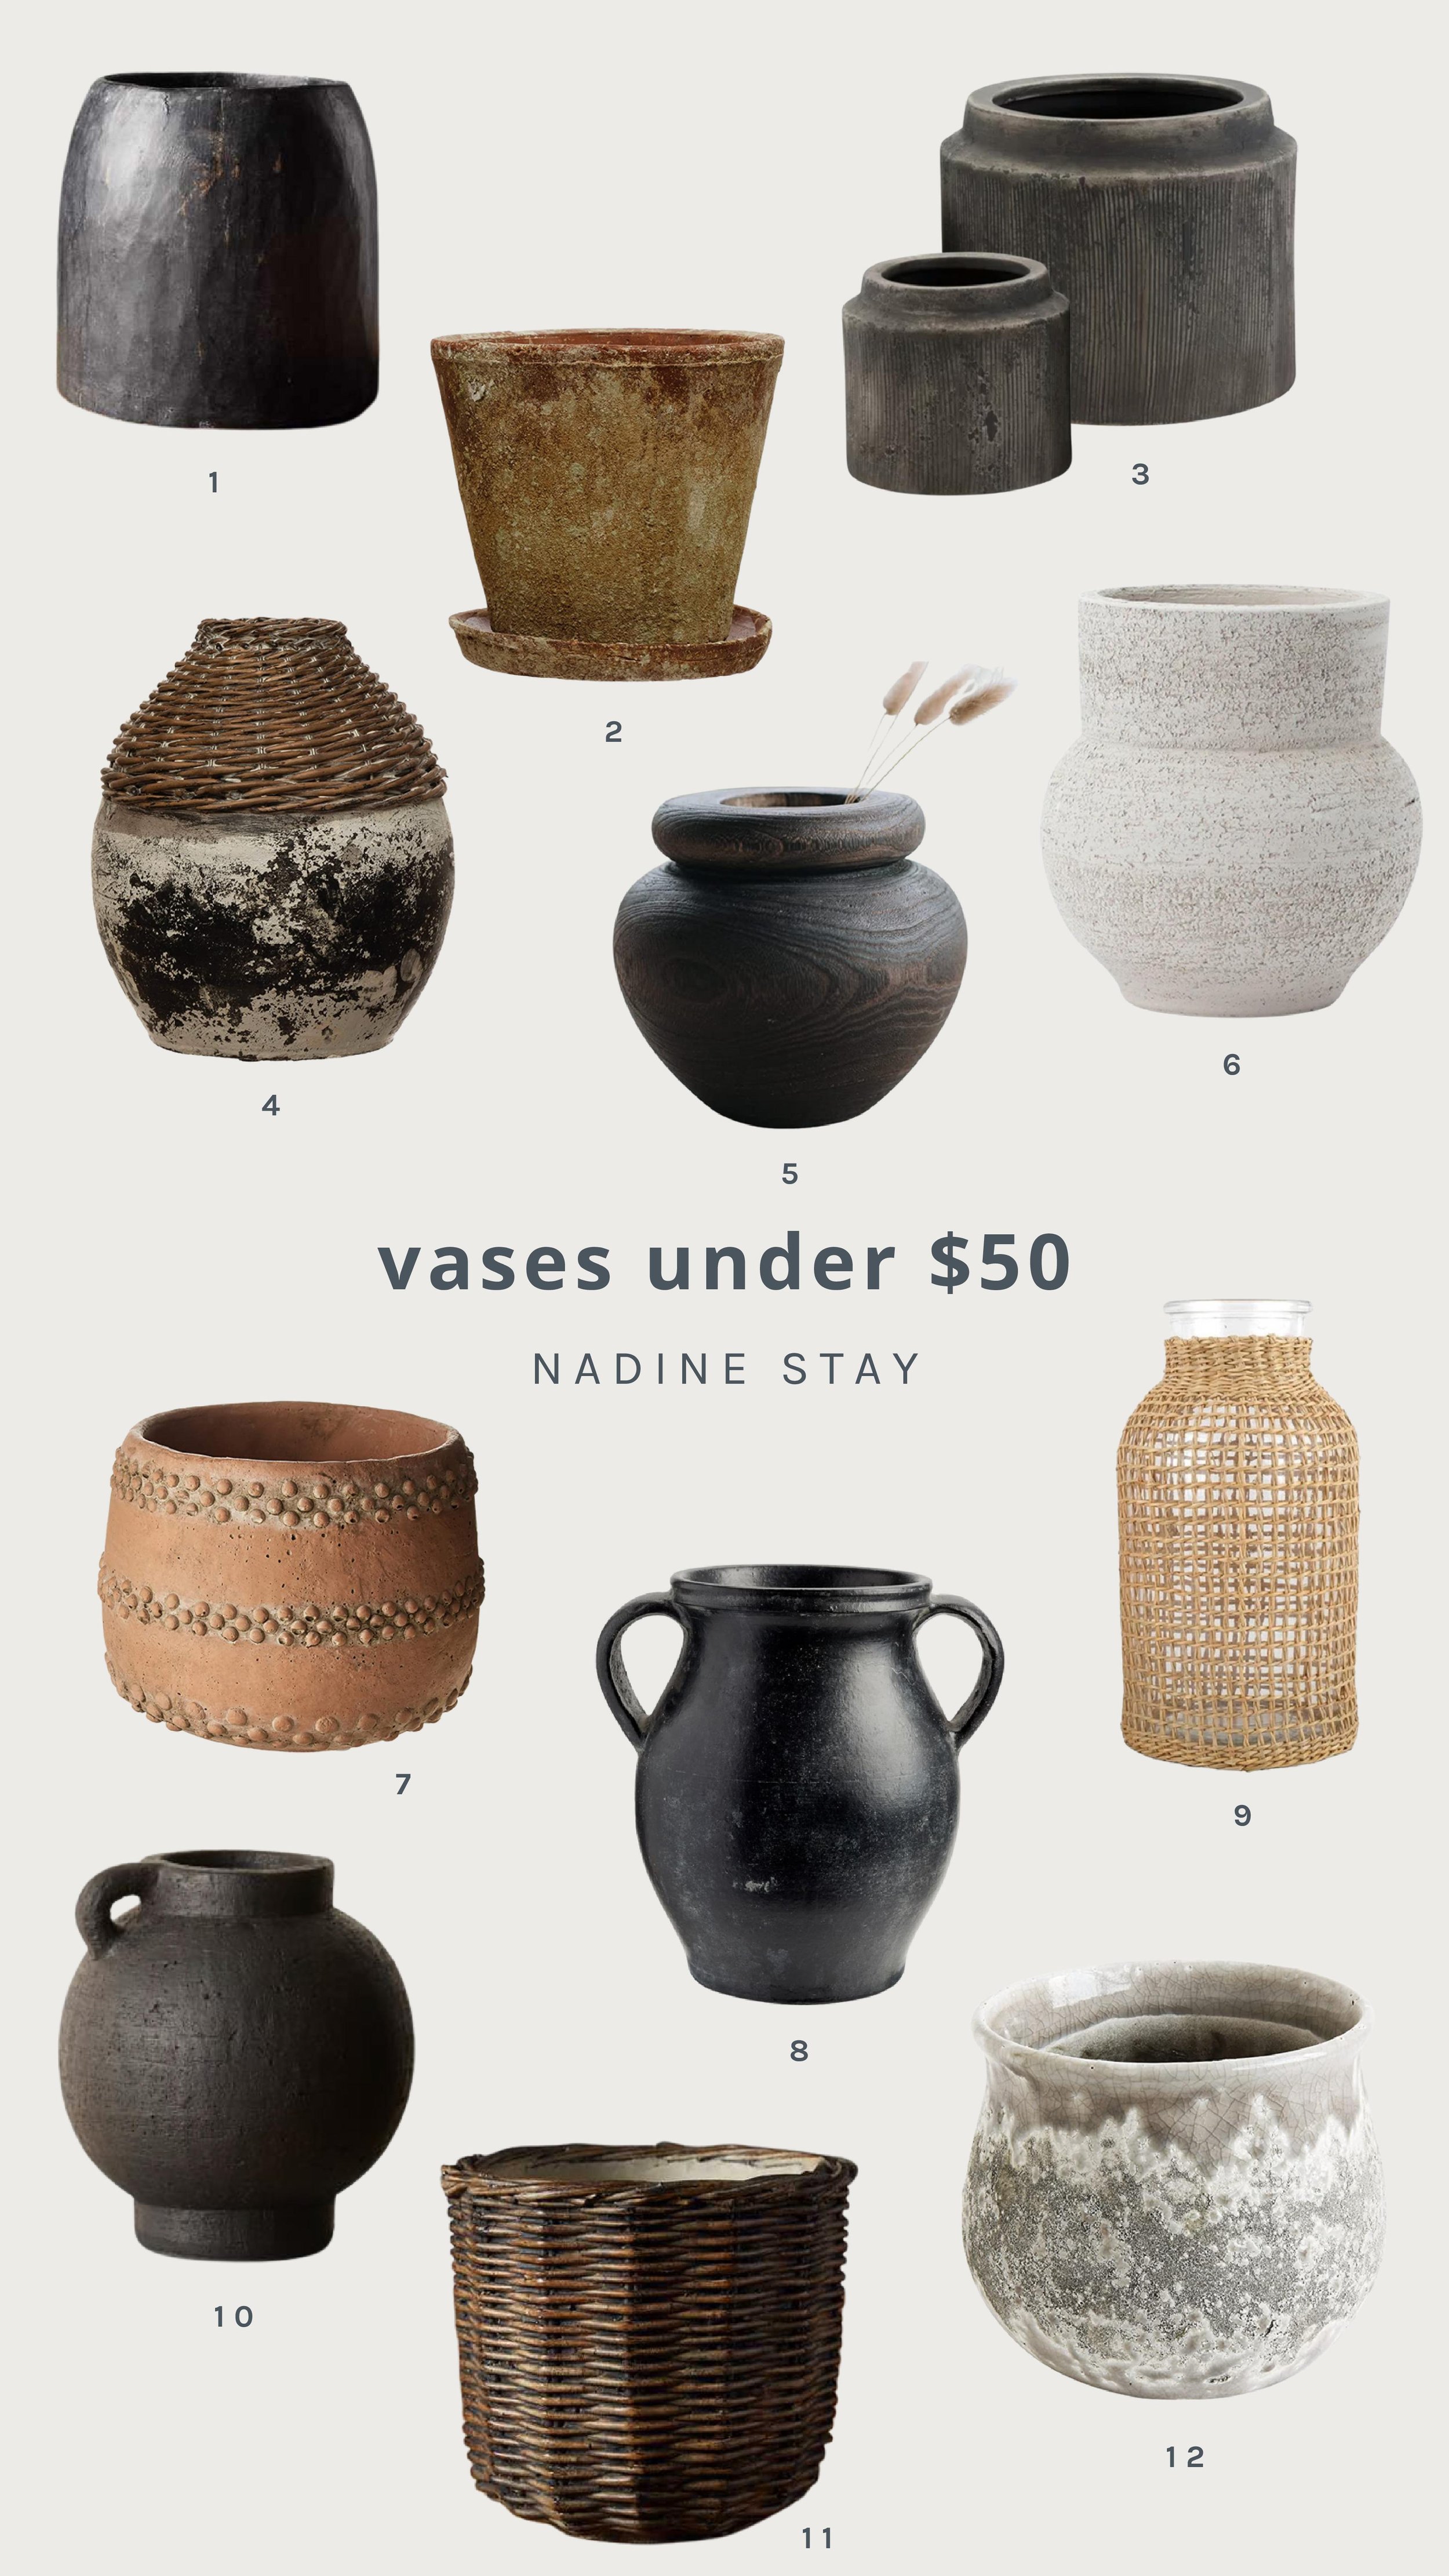 My Favorite Vases & Artisan Pottery Under $50 - Nadine Stay | Budget friendly antique vases, distressed pots, and handmade pottery. Where to find budget friendly old world vases?